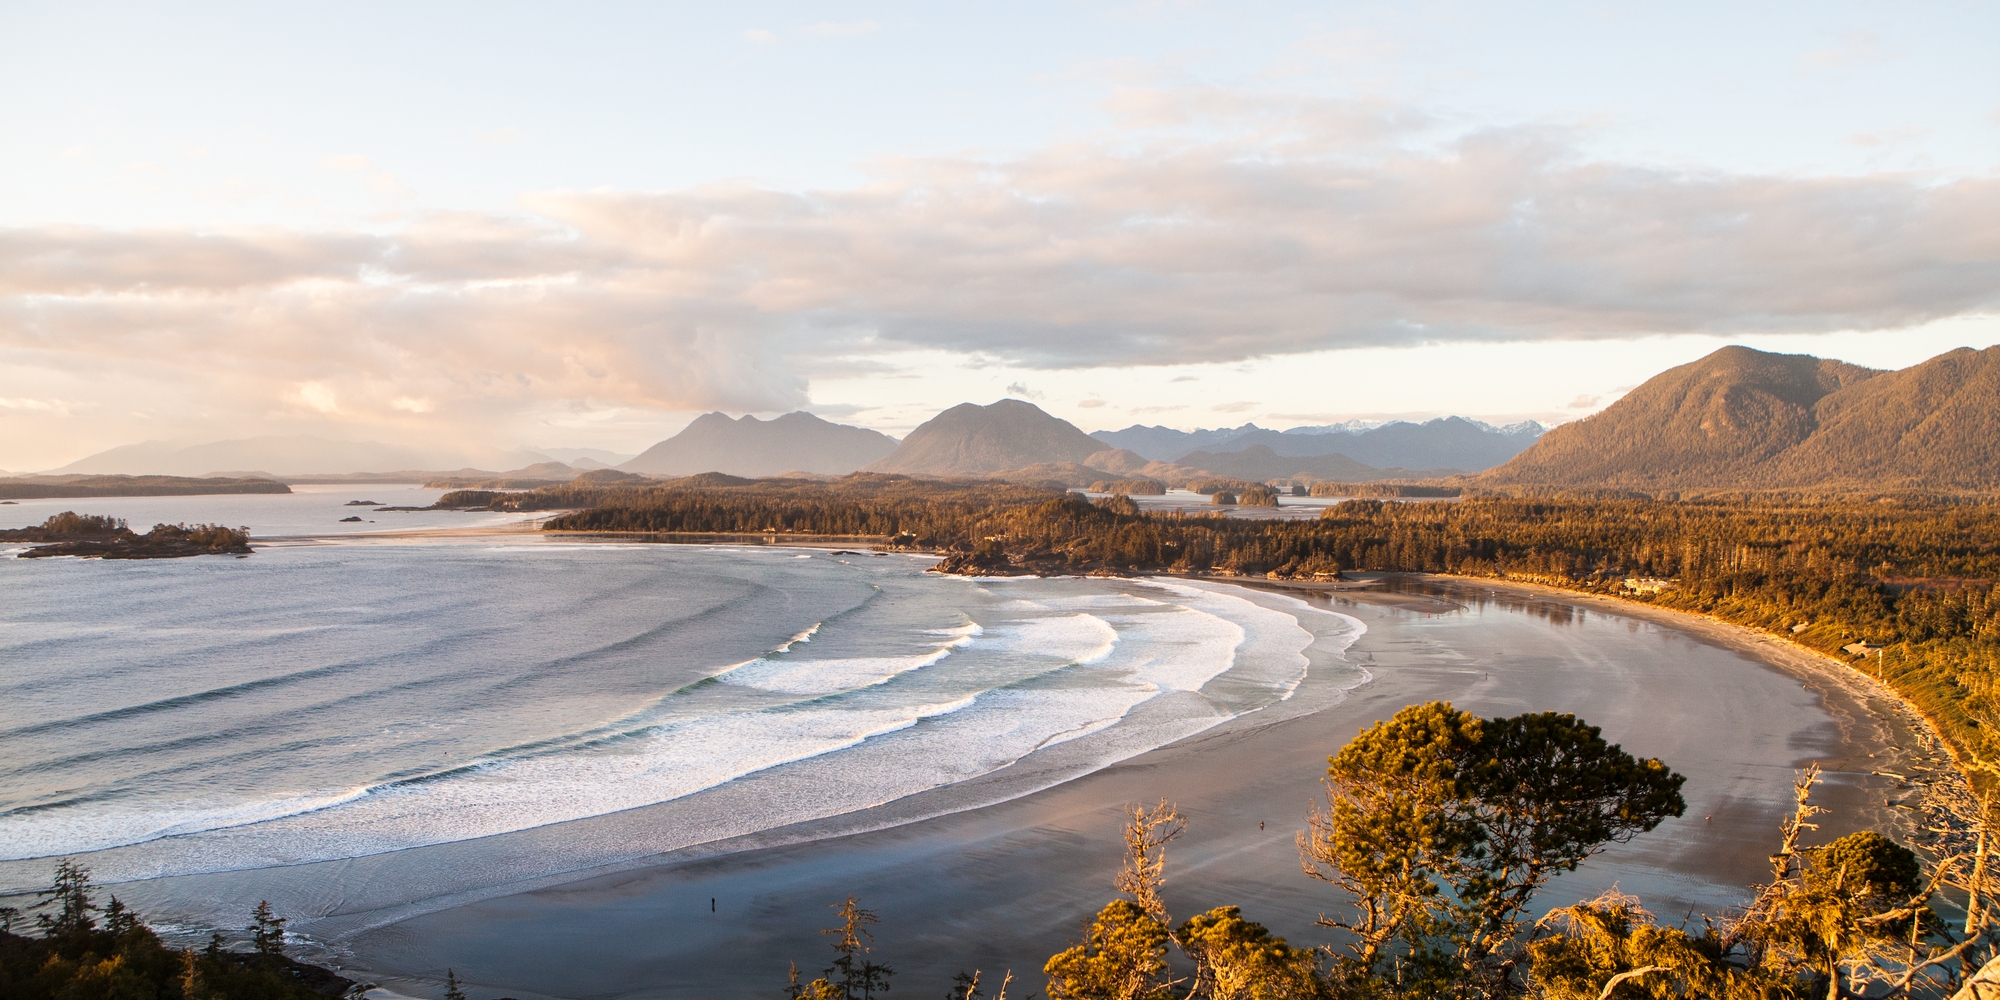 The waves roll onto shore with mountains in the background of View of Cox Bay in Tofino